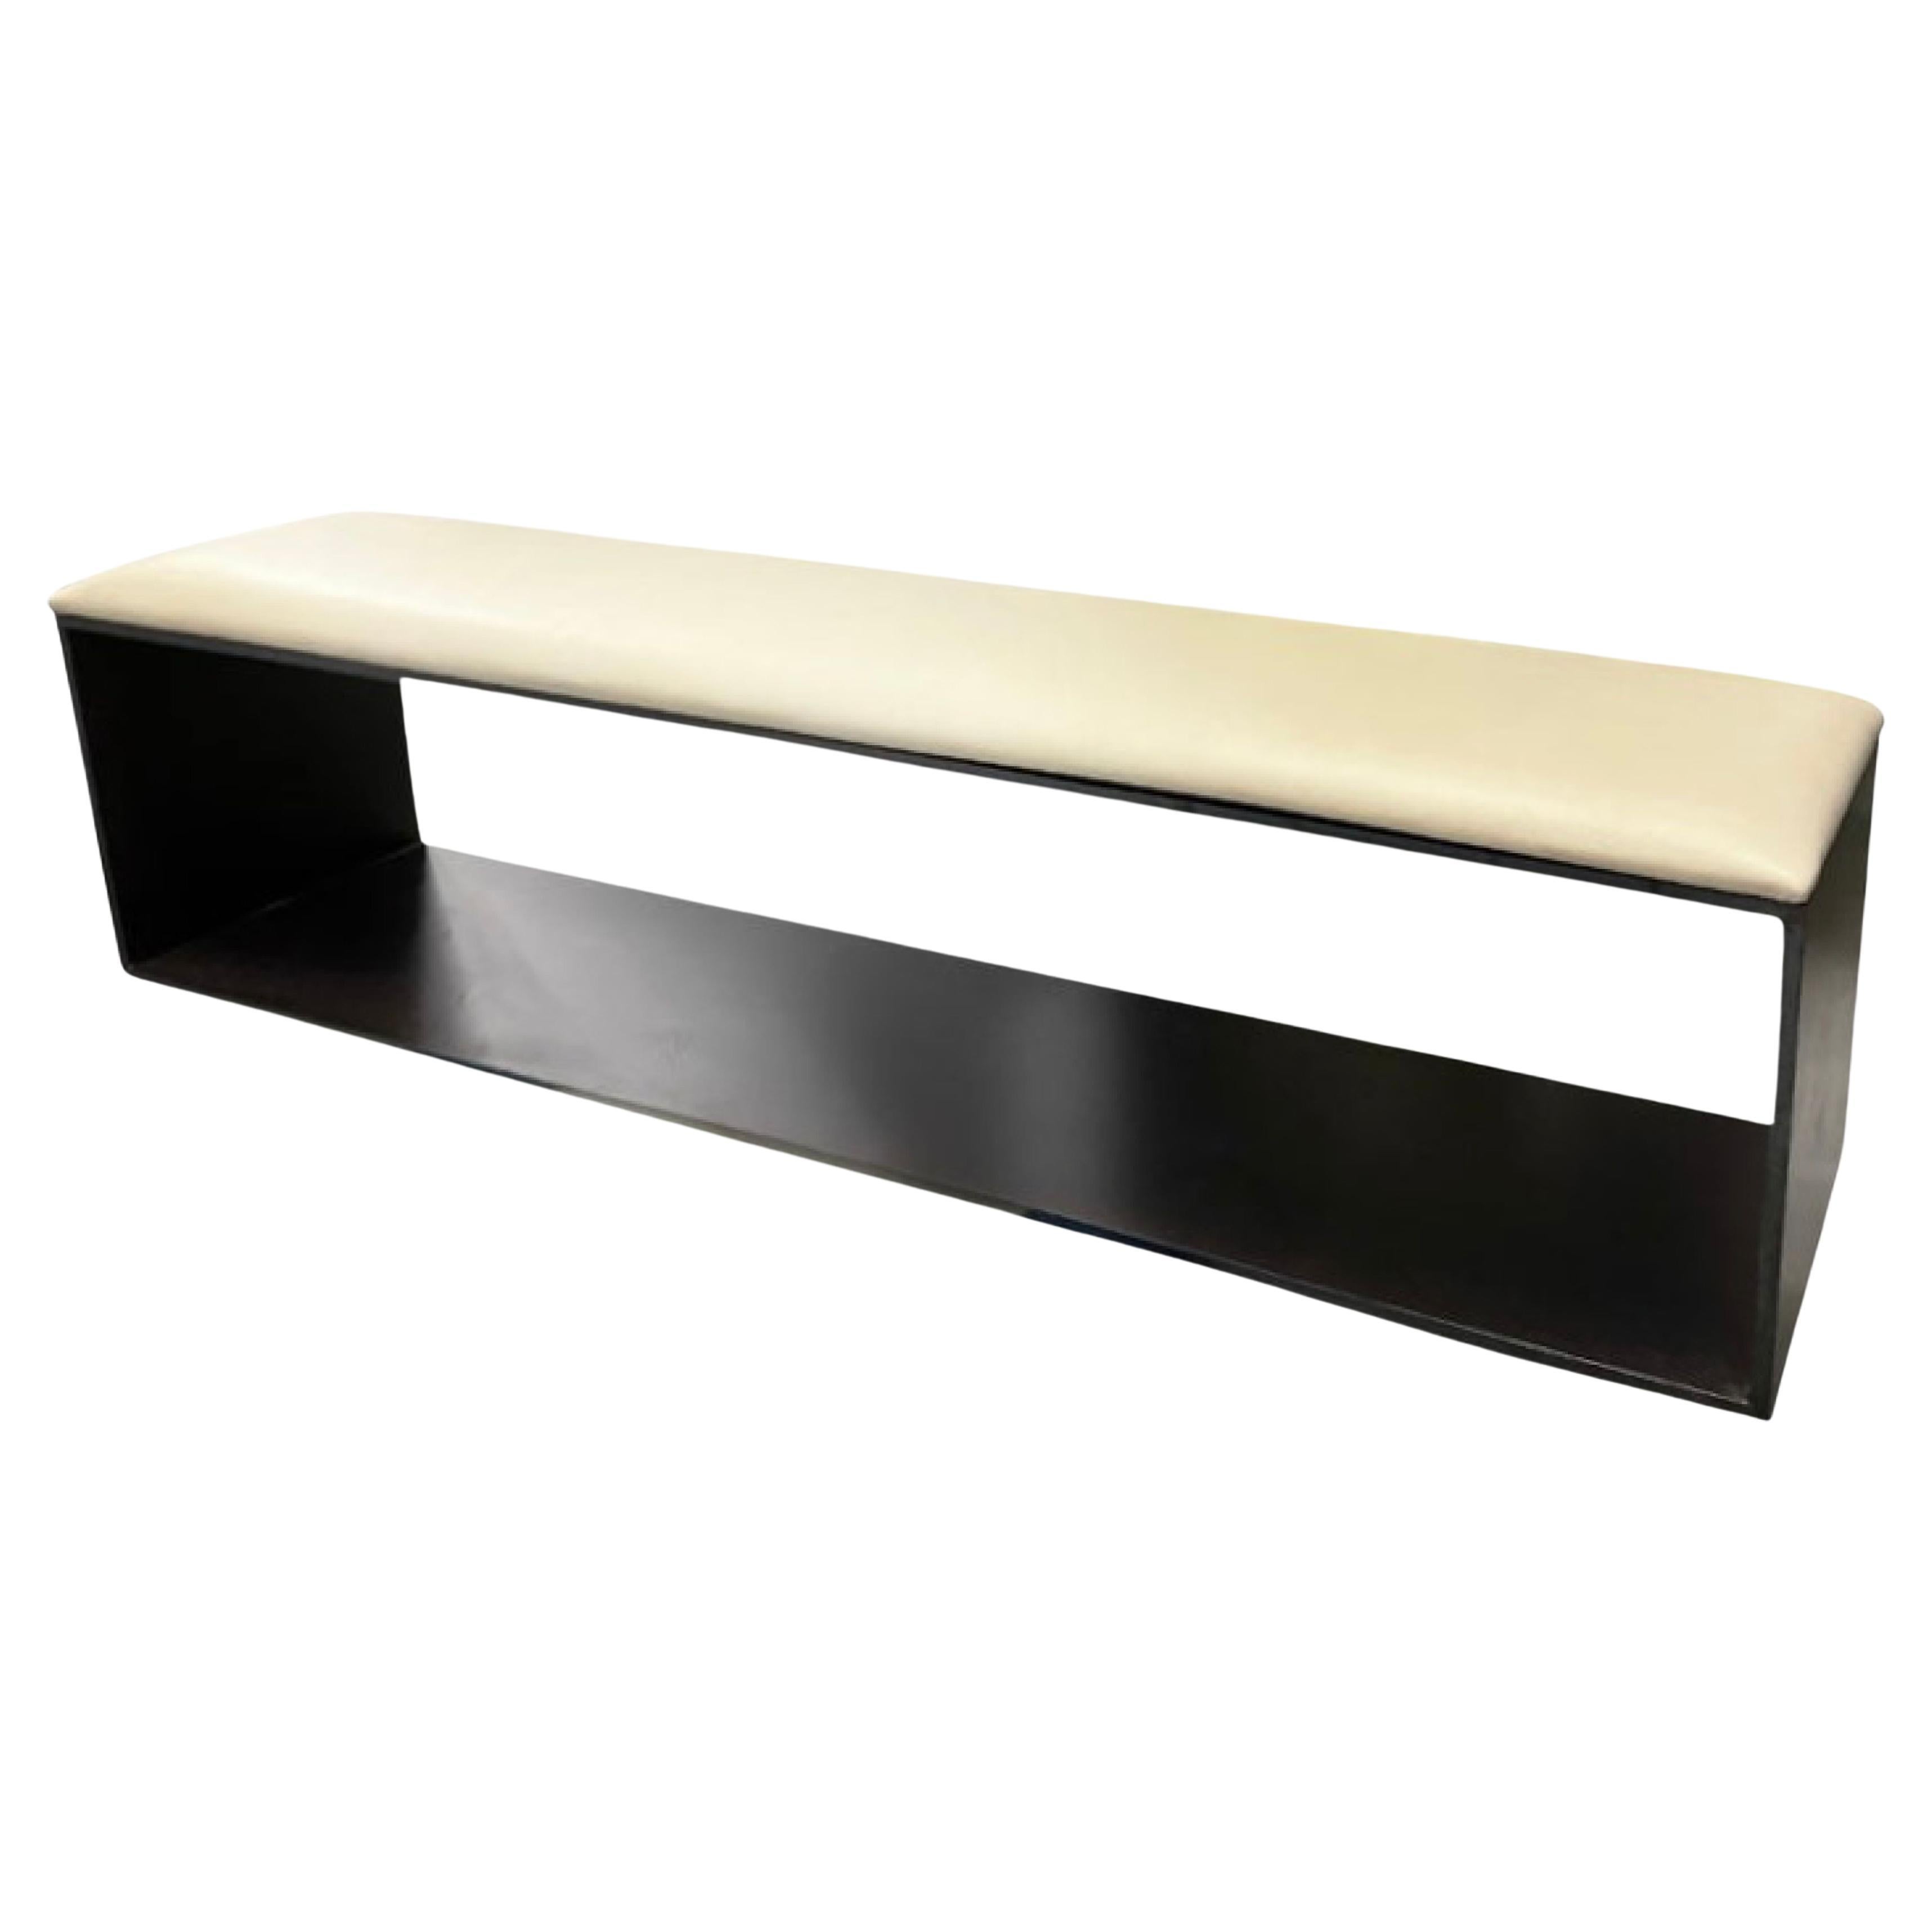 Christian Liaigre for Holly Hunt Leather and Bronze bench, Minimal Modern France. Cream leather top. Solid metal base. Sleek and minimal with substantial weight. No longer in production.